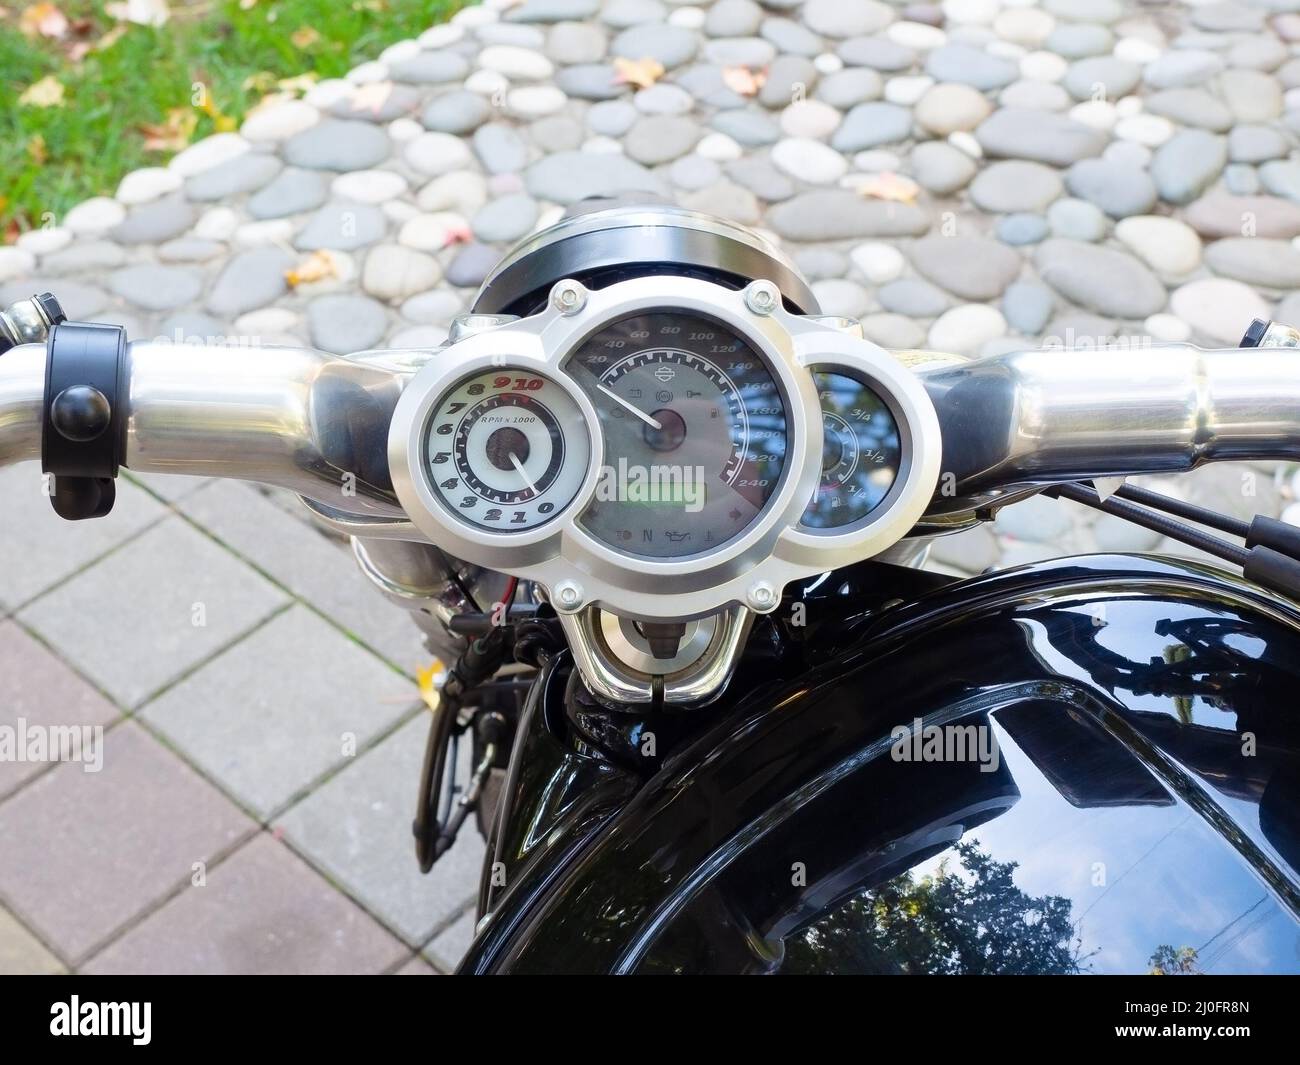 Motorcycle handlebar with circular speedometer against the background of paving slabs and decorative masonry Stock Photo